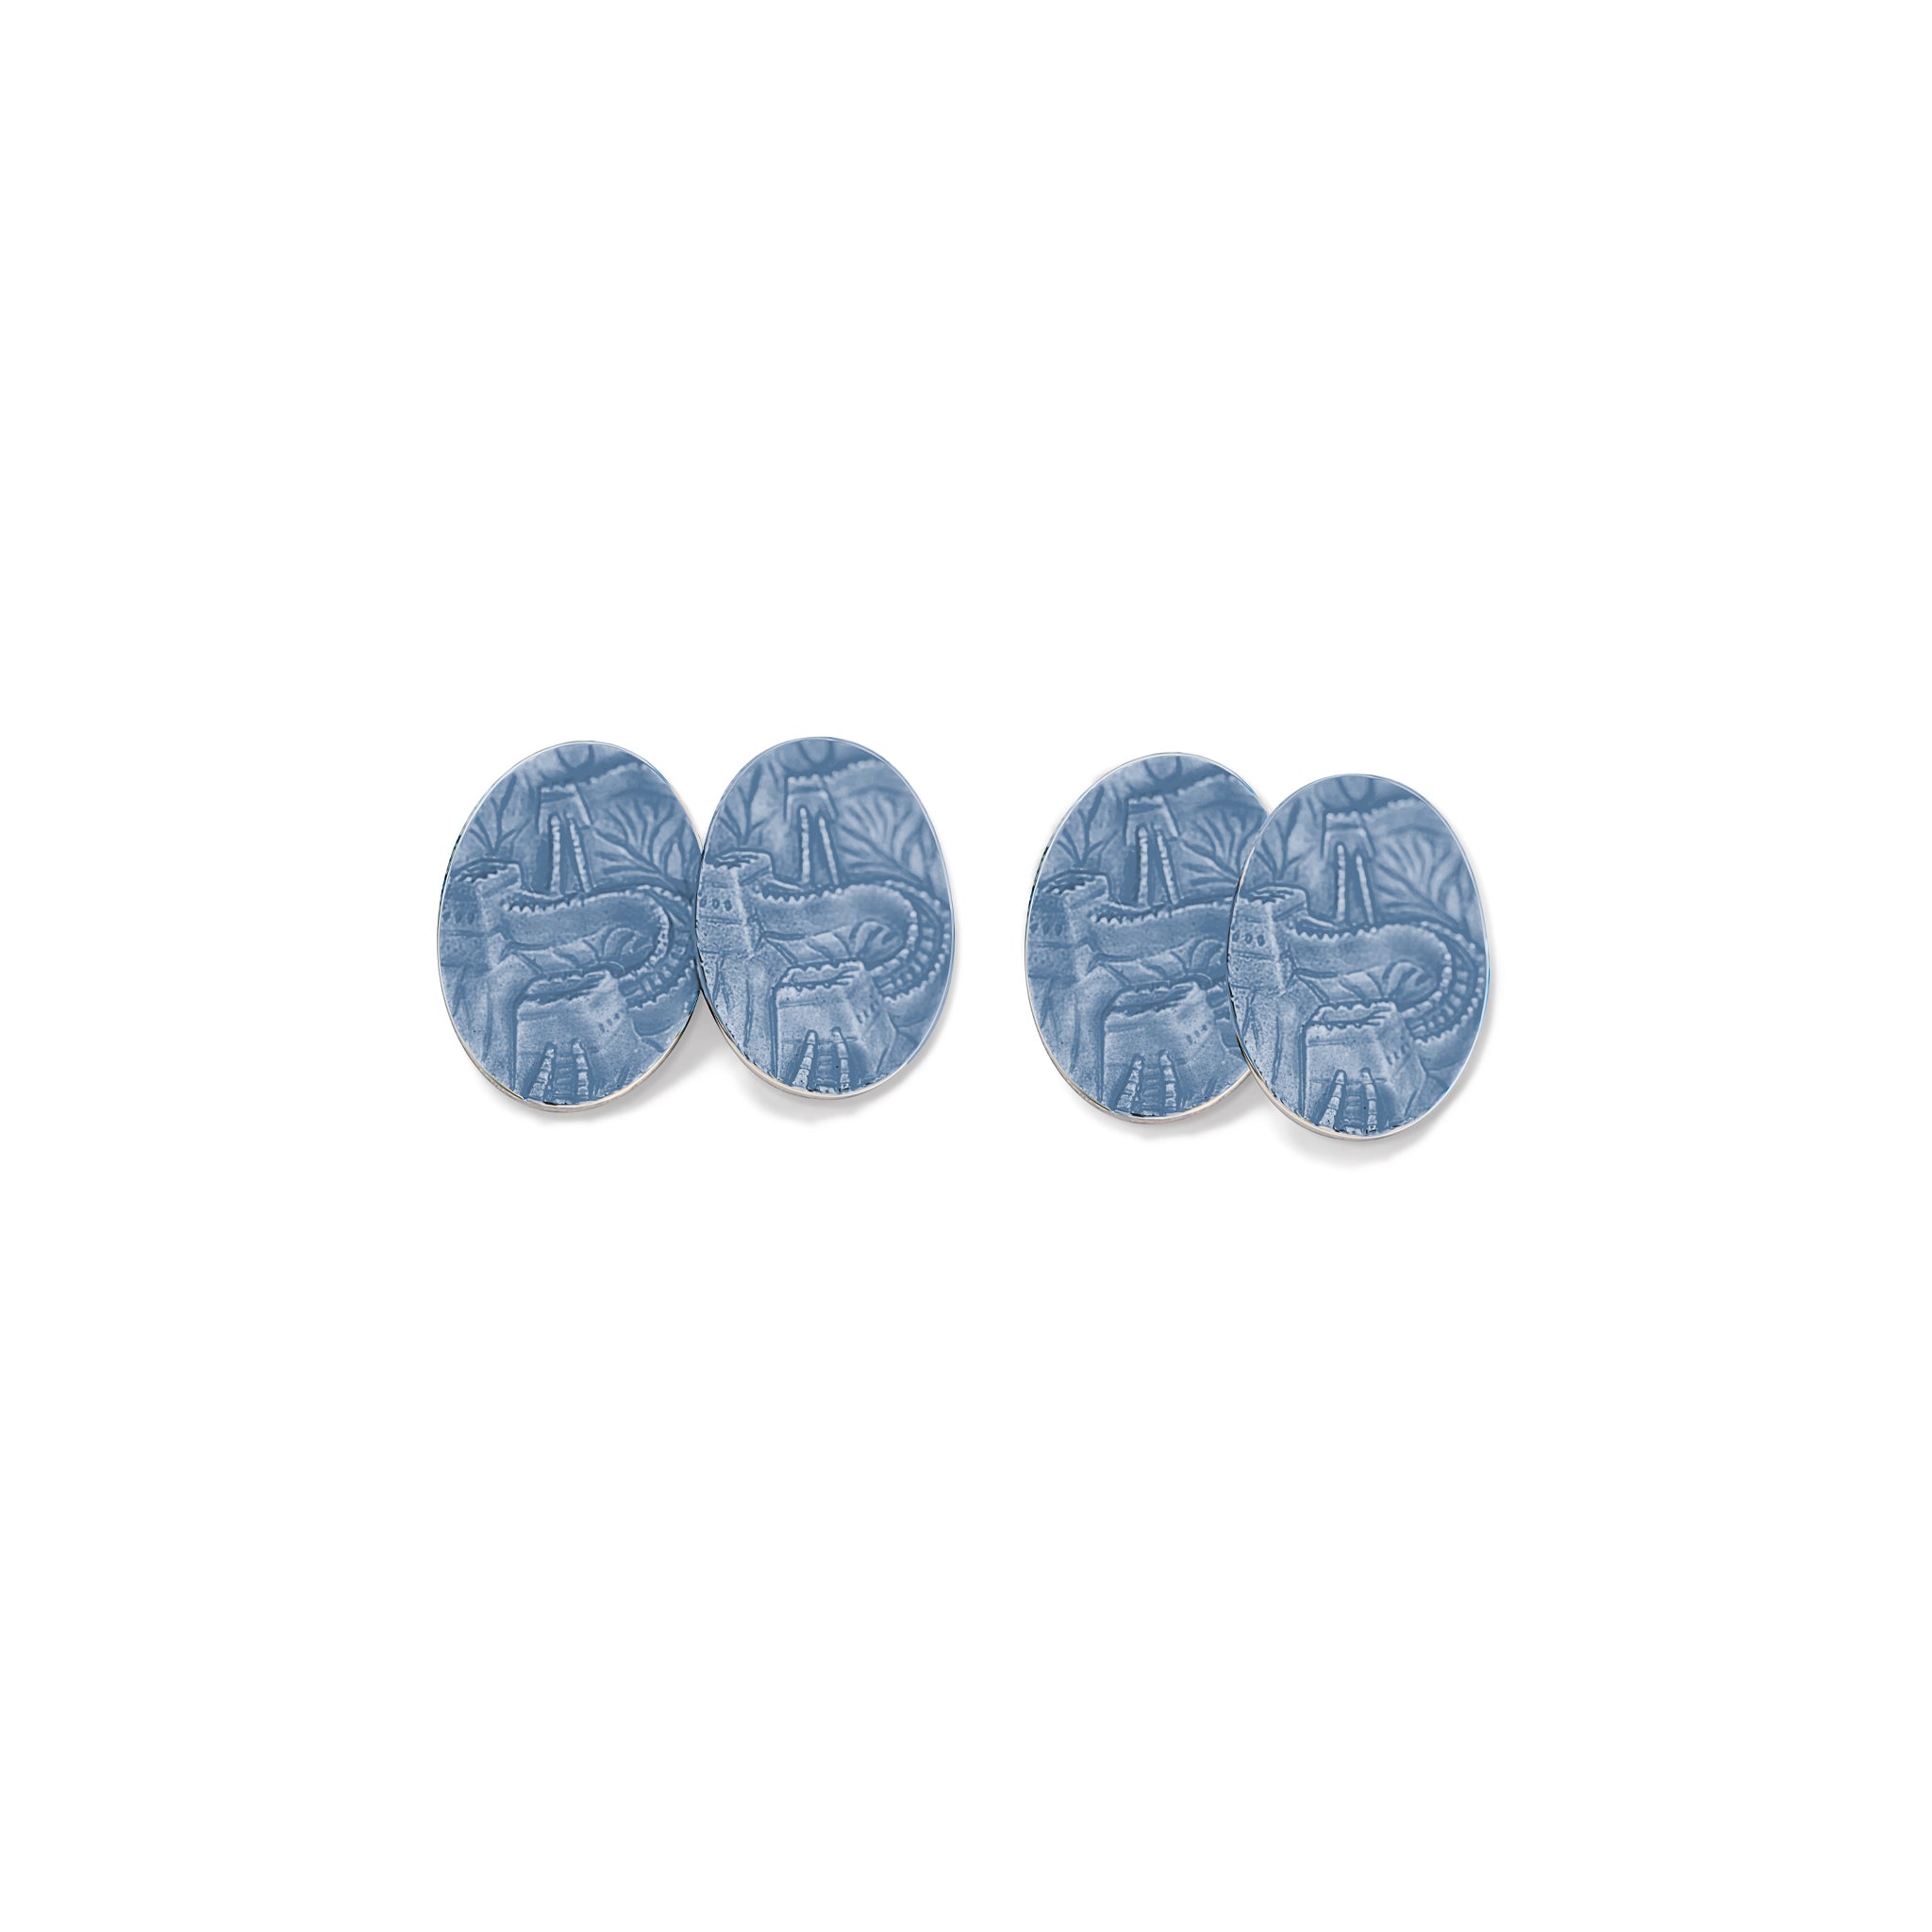 Great Wall of China Double Ended Cufflinks Silver - Grey Blue Enamel